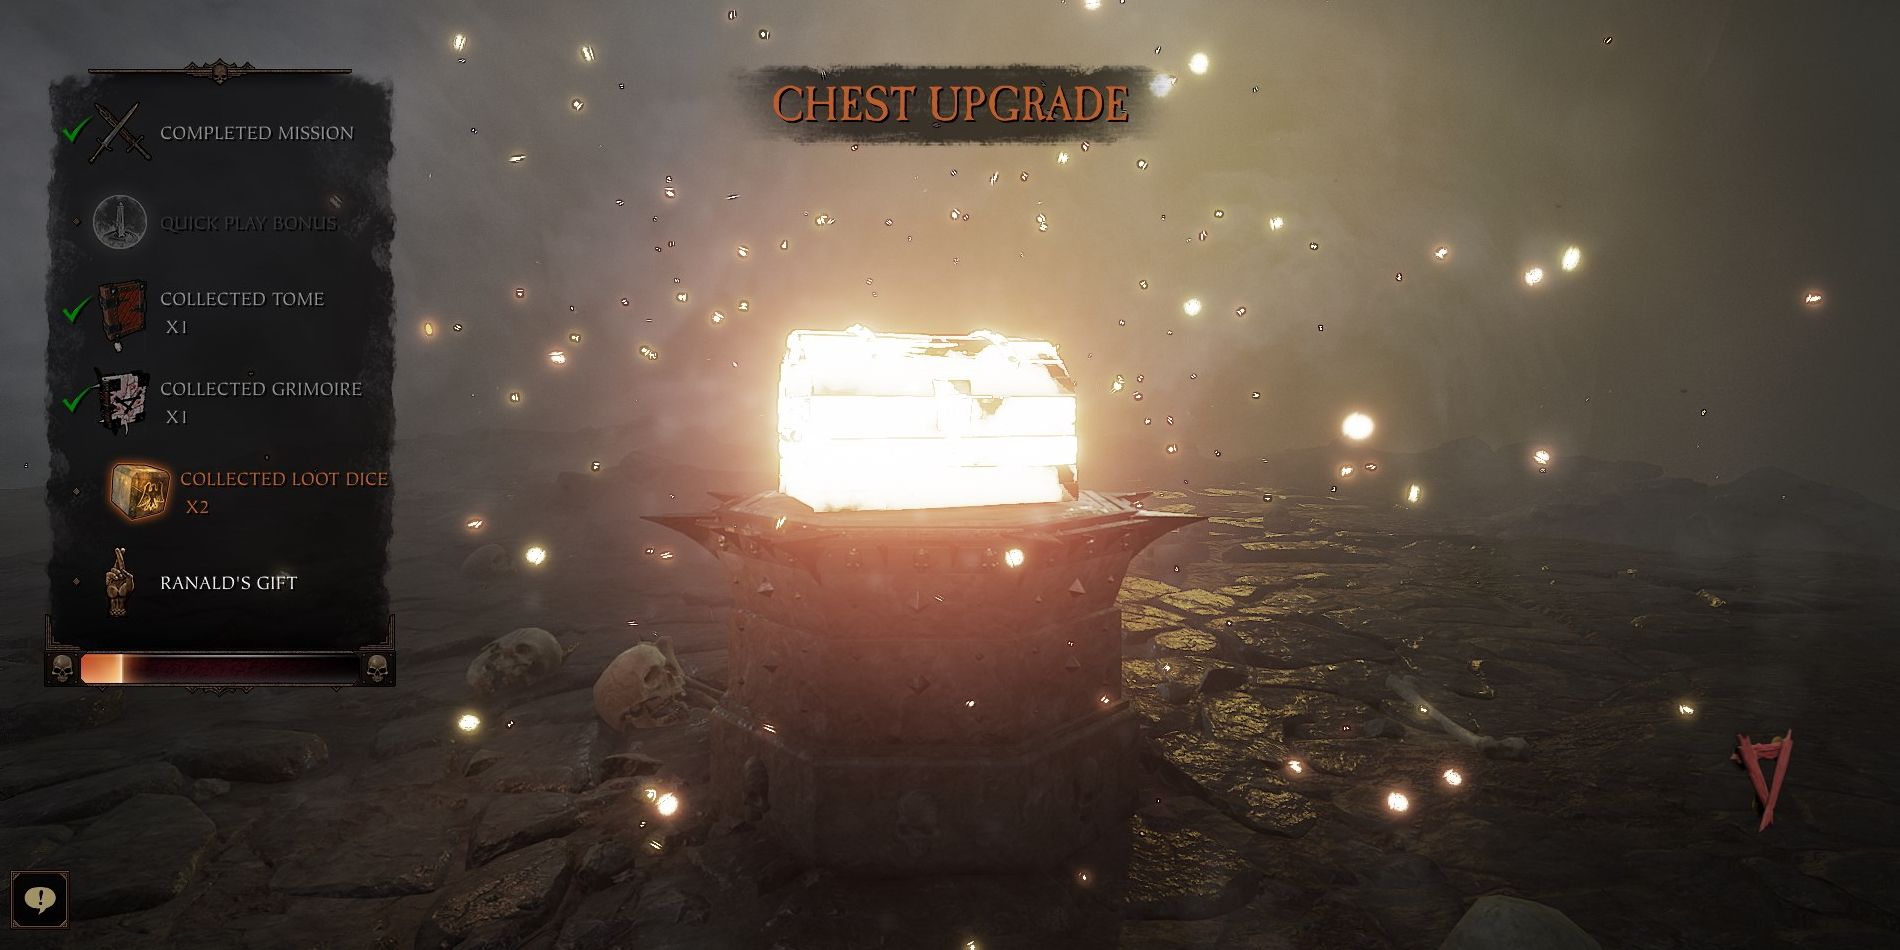 A chest upgrading in Vermintide 2.